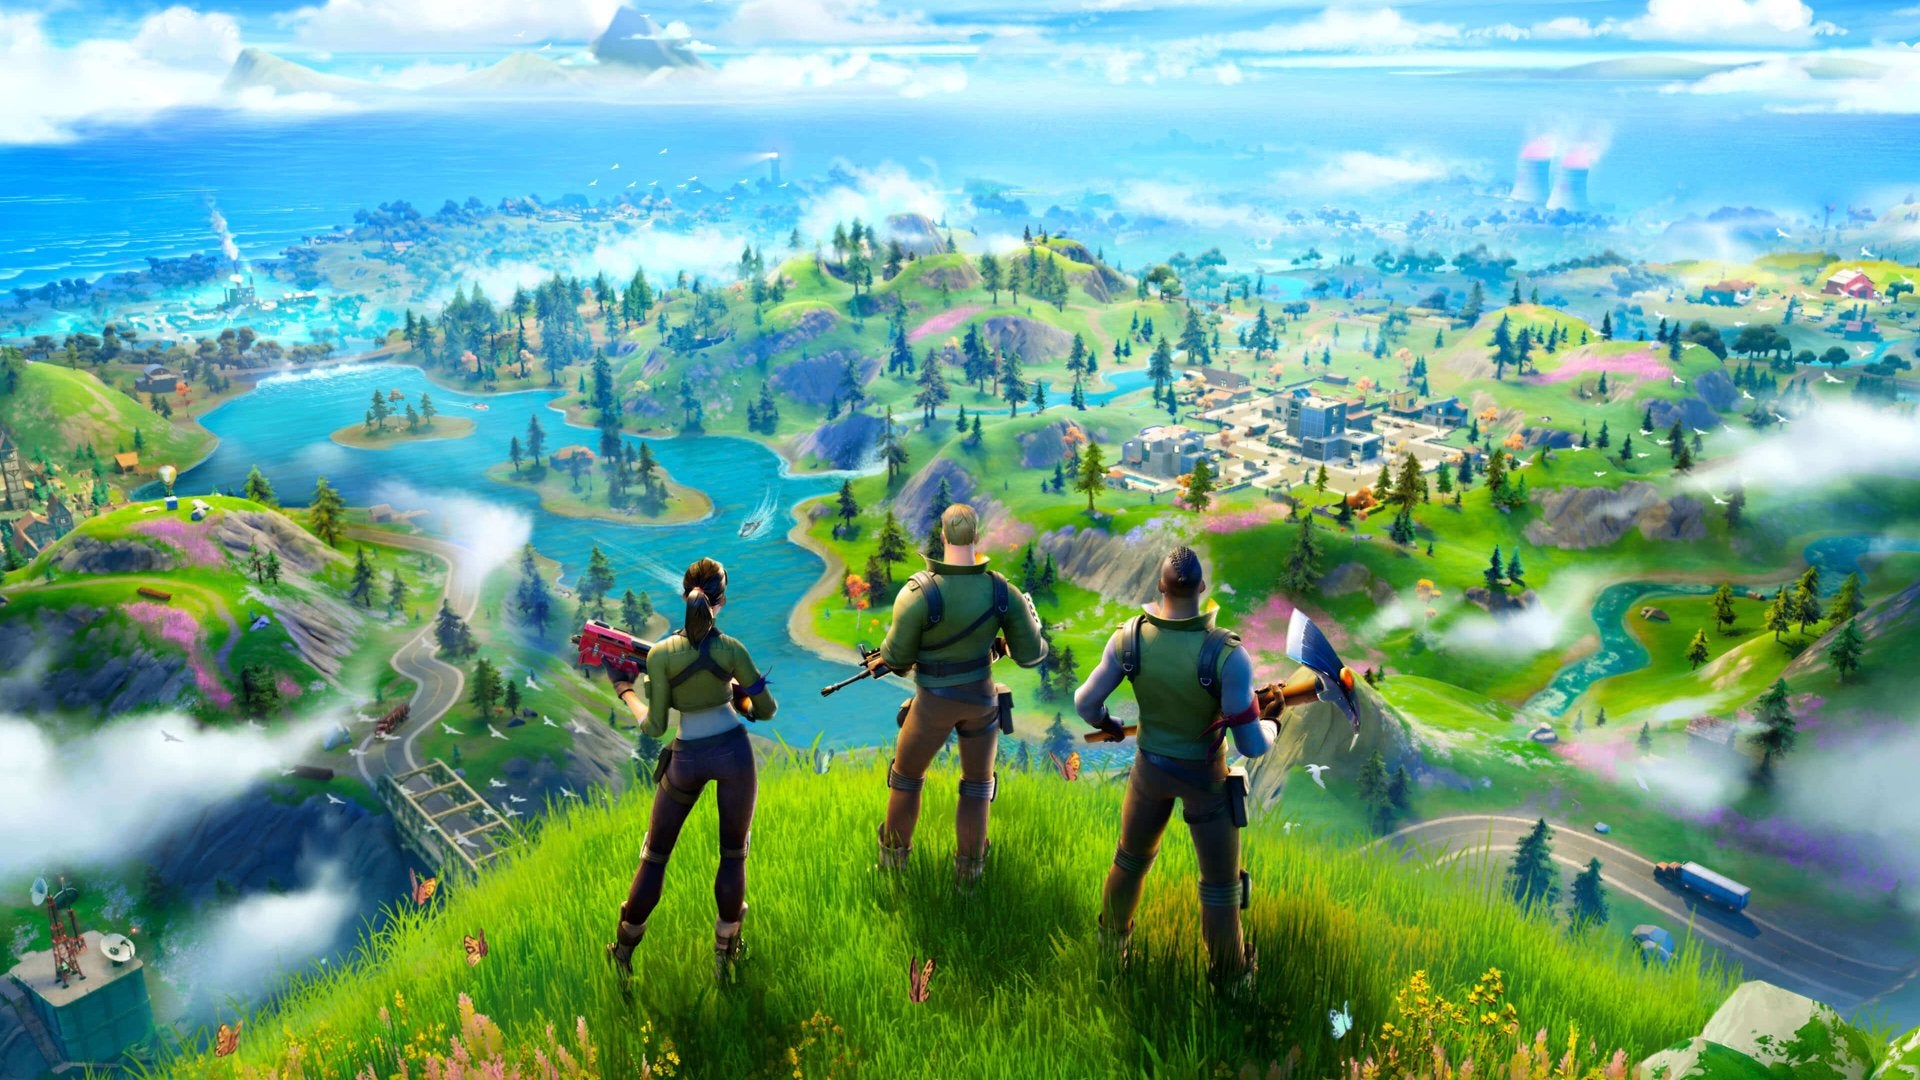 Image for Epic Games CEO says devs and stores should be apolitical - as if that was possible